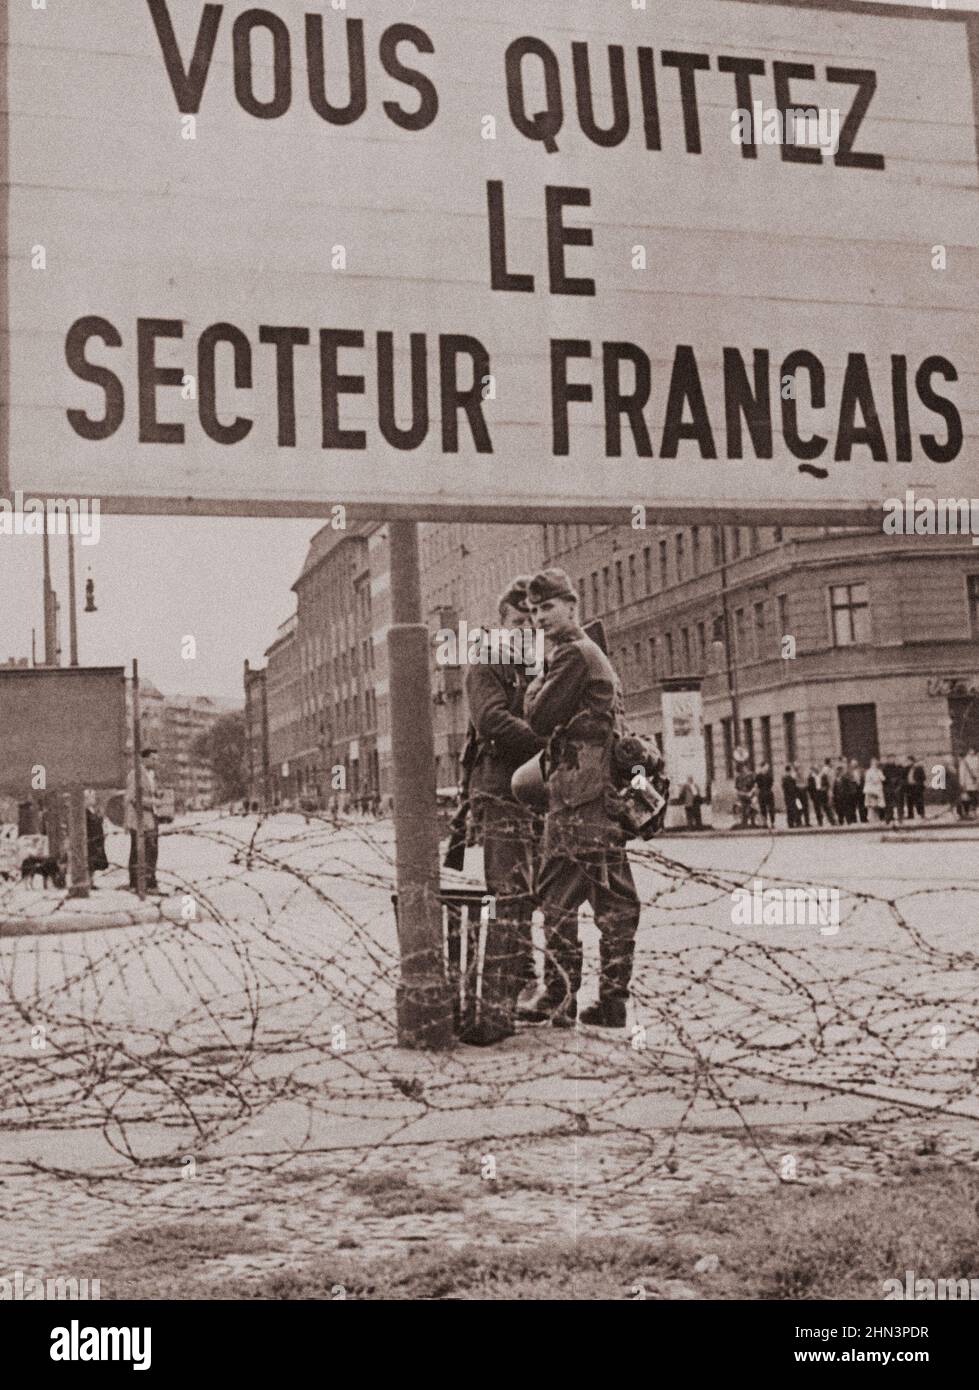 Vintage photo of Berlin Crisis of 1961: Building the Wall. Sign Marking End of the French Sector of West Berlin Is Seen Over the Barbed Wire Fence, Wi Stock Photo